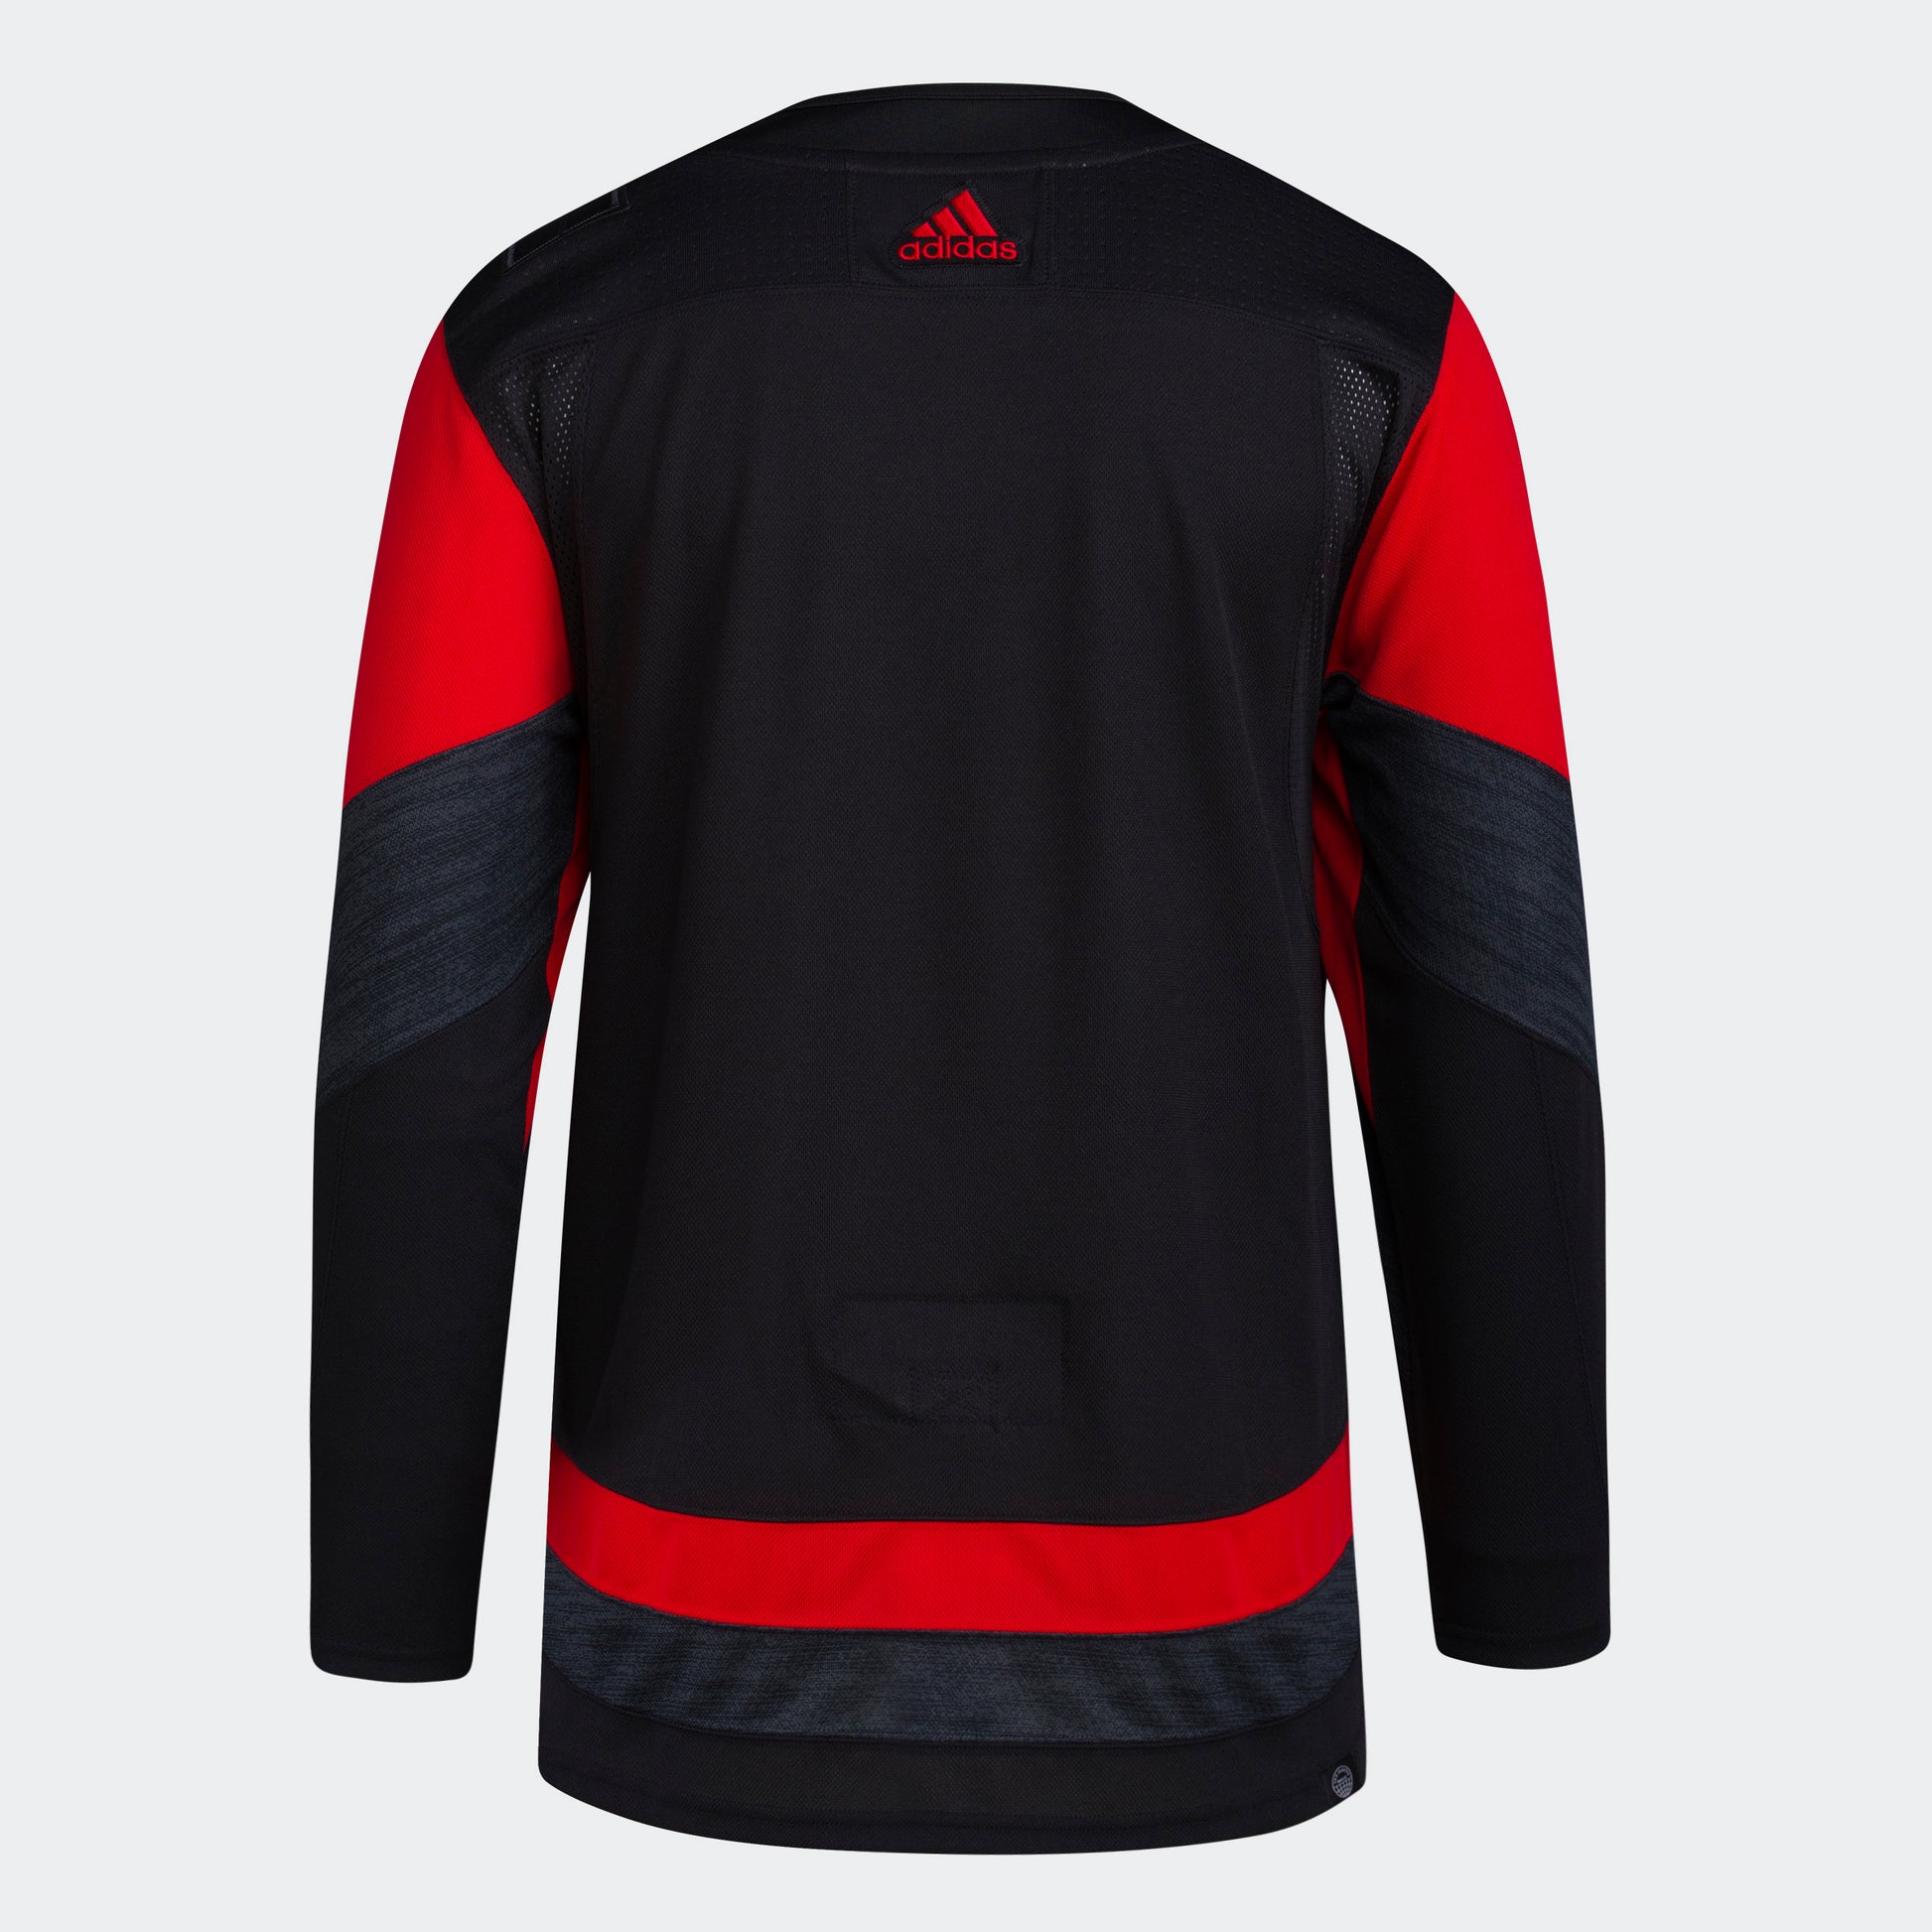 Back View: Black and red jersey with red adidas logo at top.